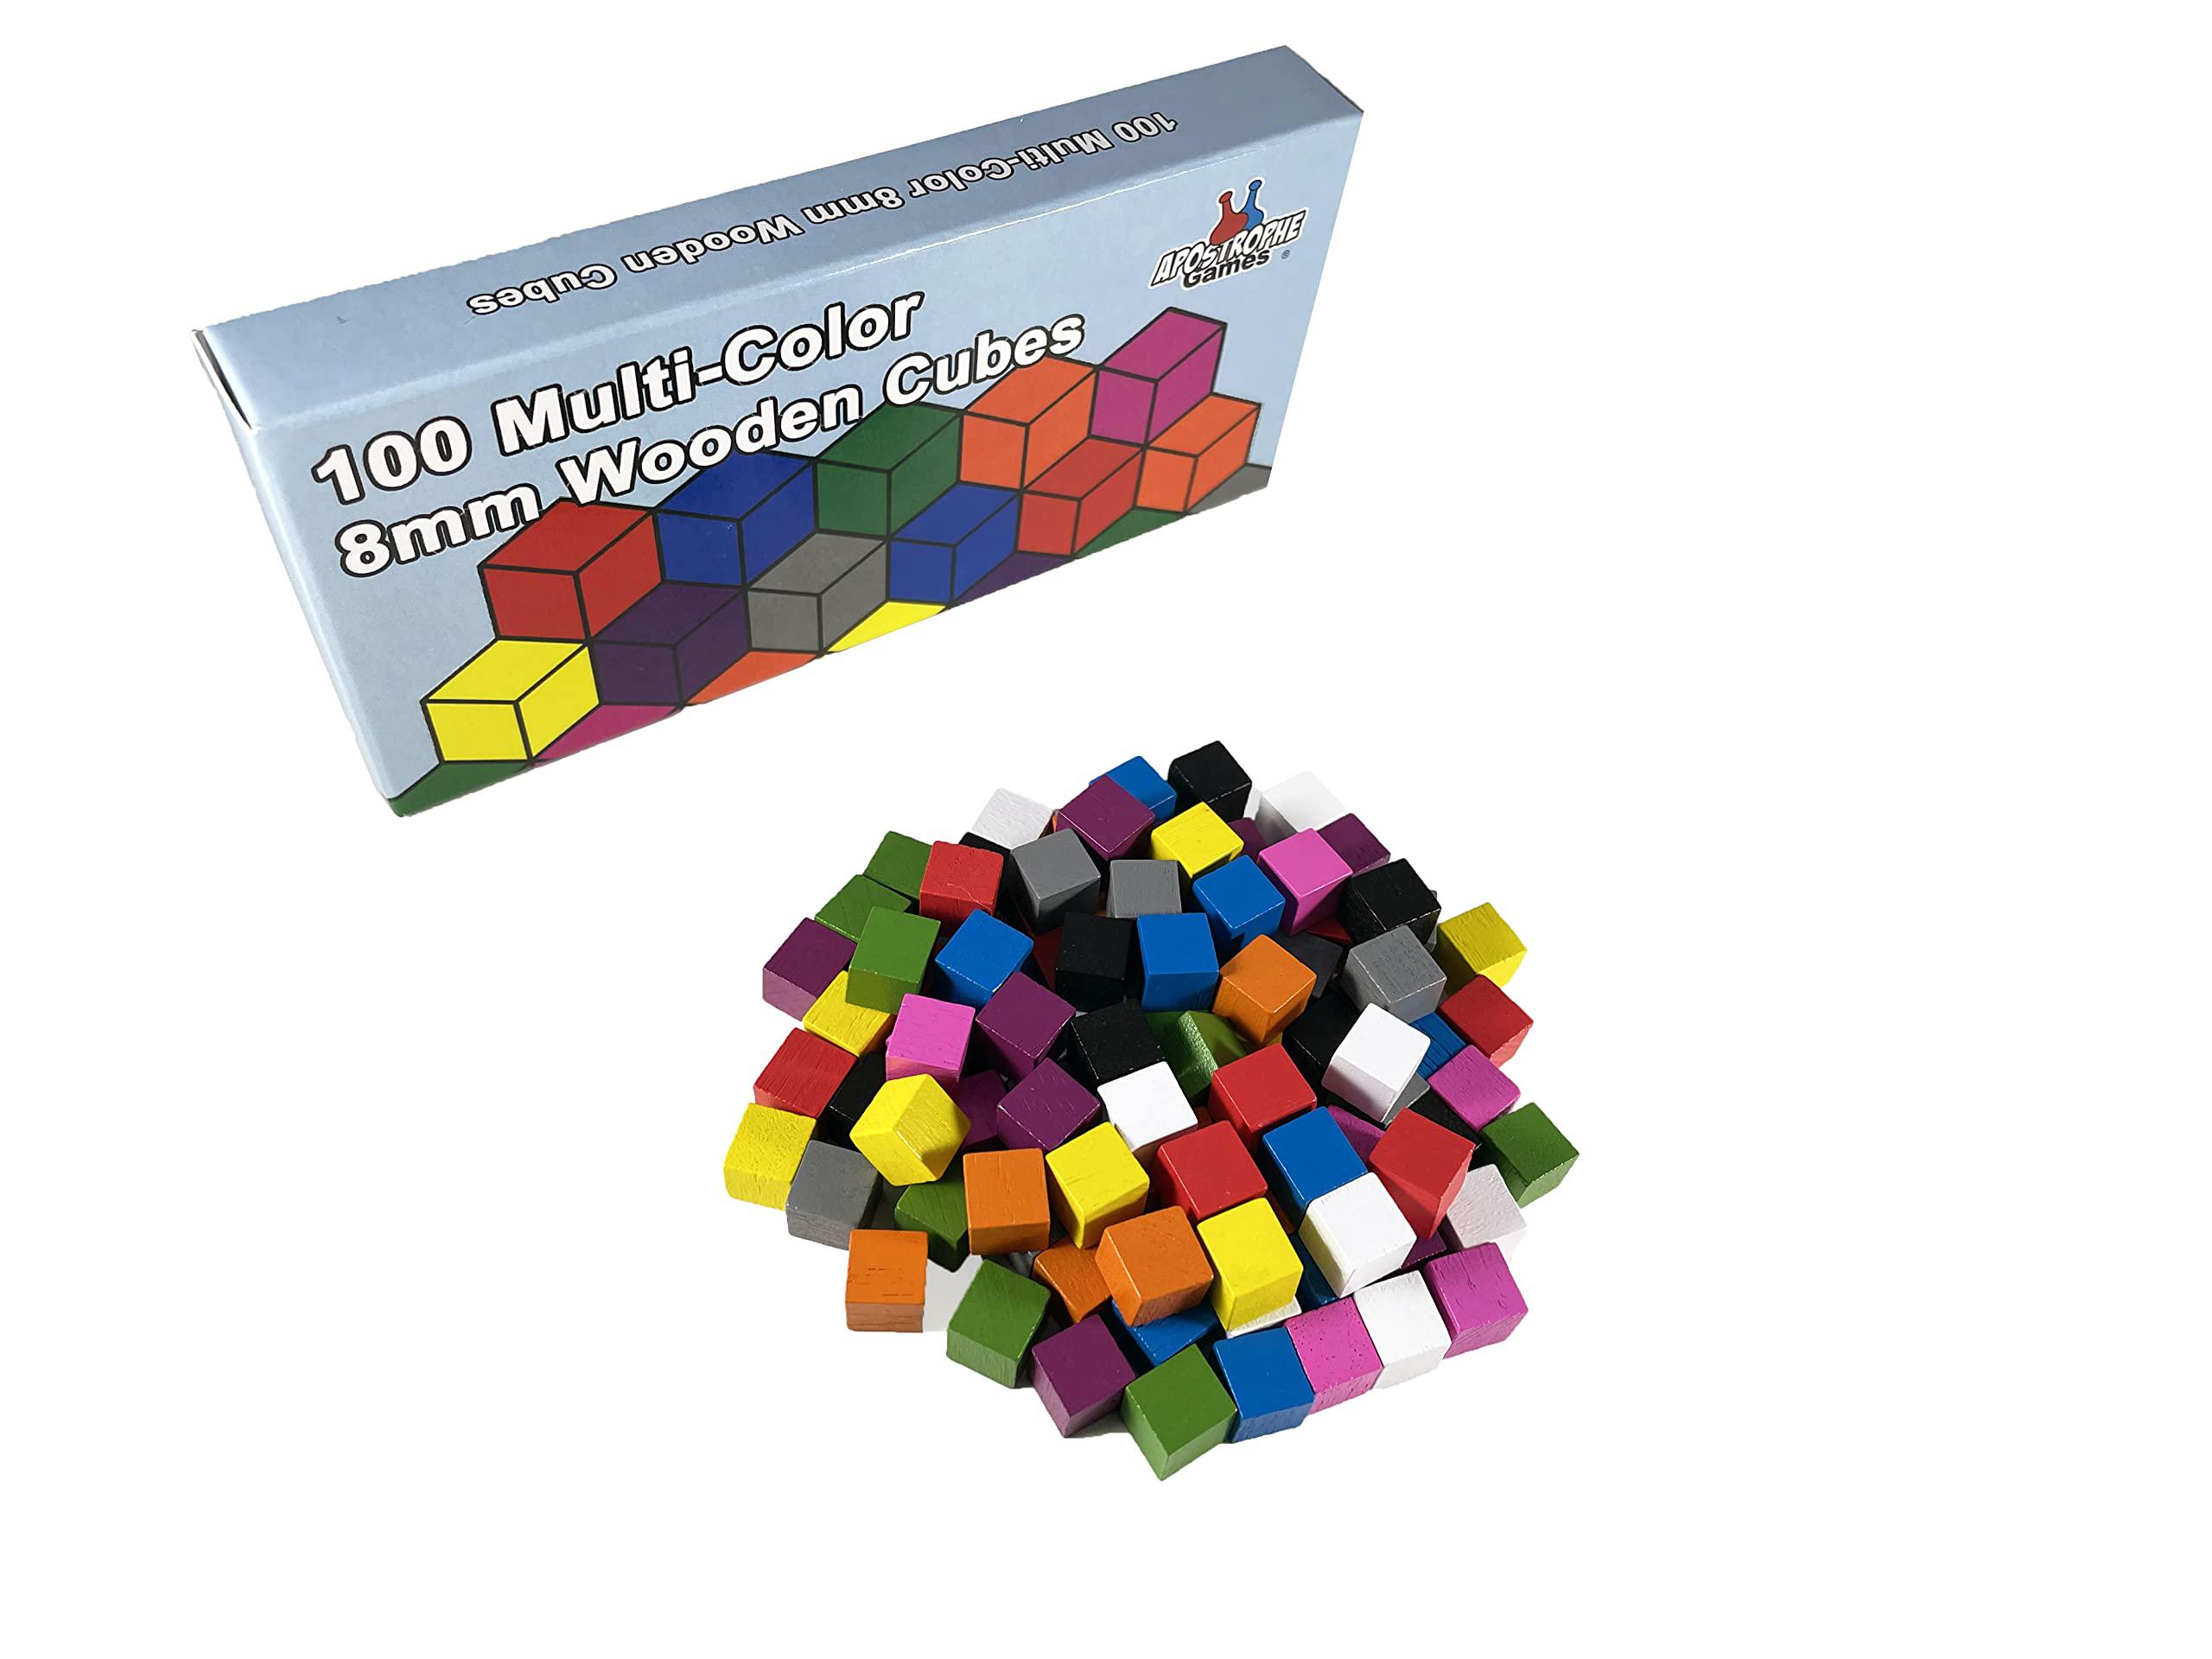 Apostrophe Games 100 wooden cubes, family games accessories - multi-color board game tokens ideal for sorting, counting, classrooms, replaceme